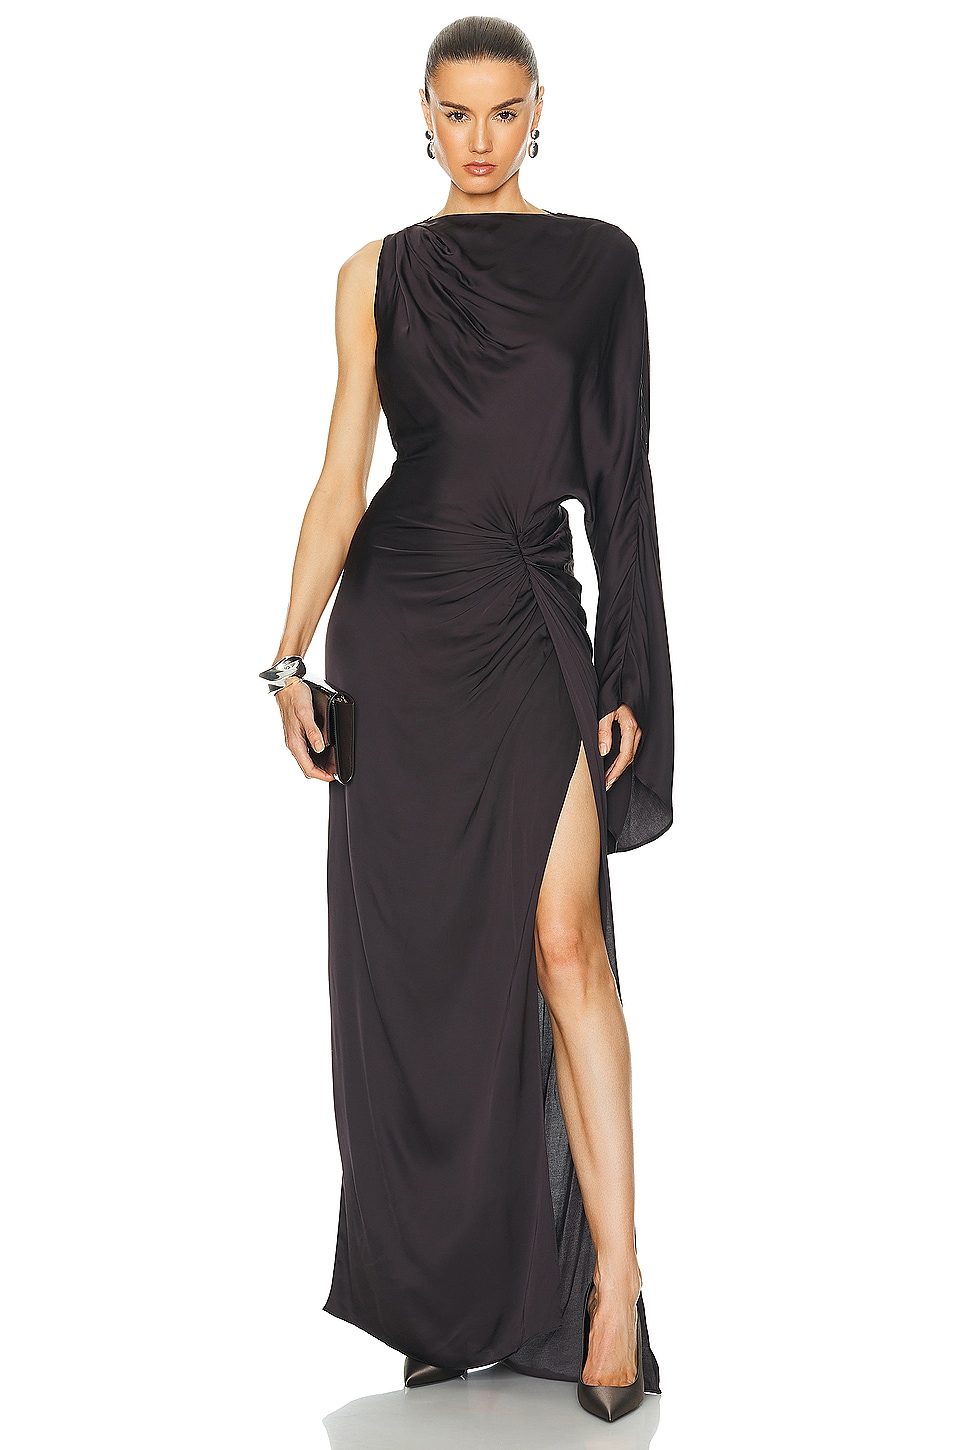 Image 1 of L'Academie by Marianna Cassia Gown in Dark Brown